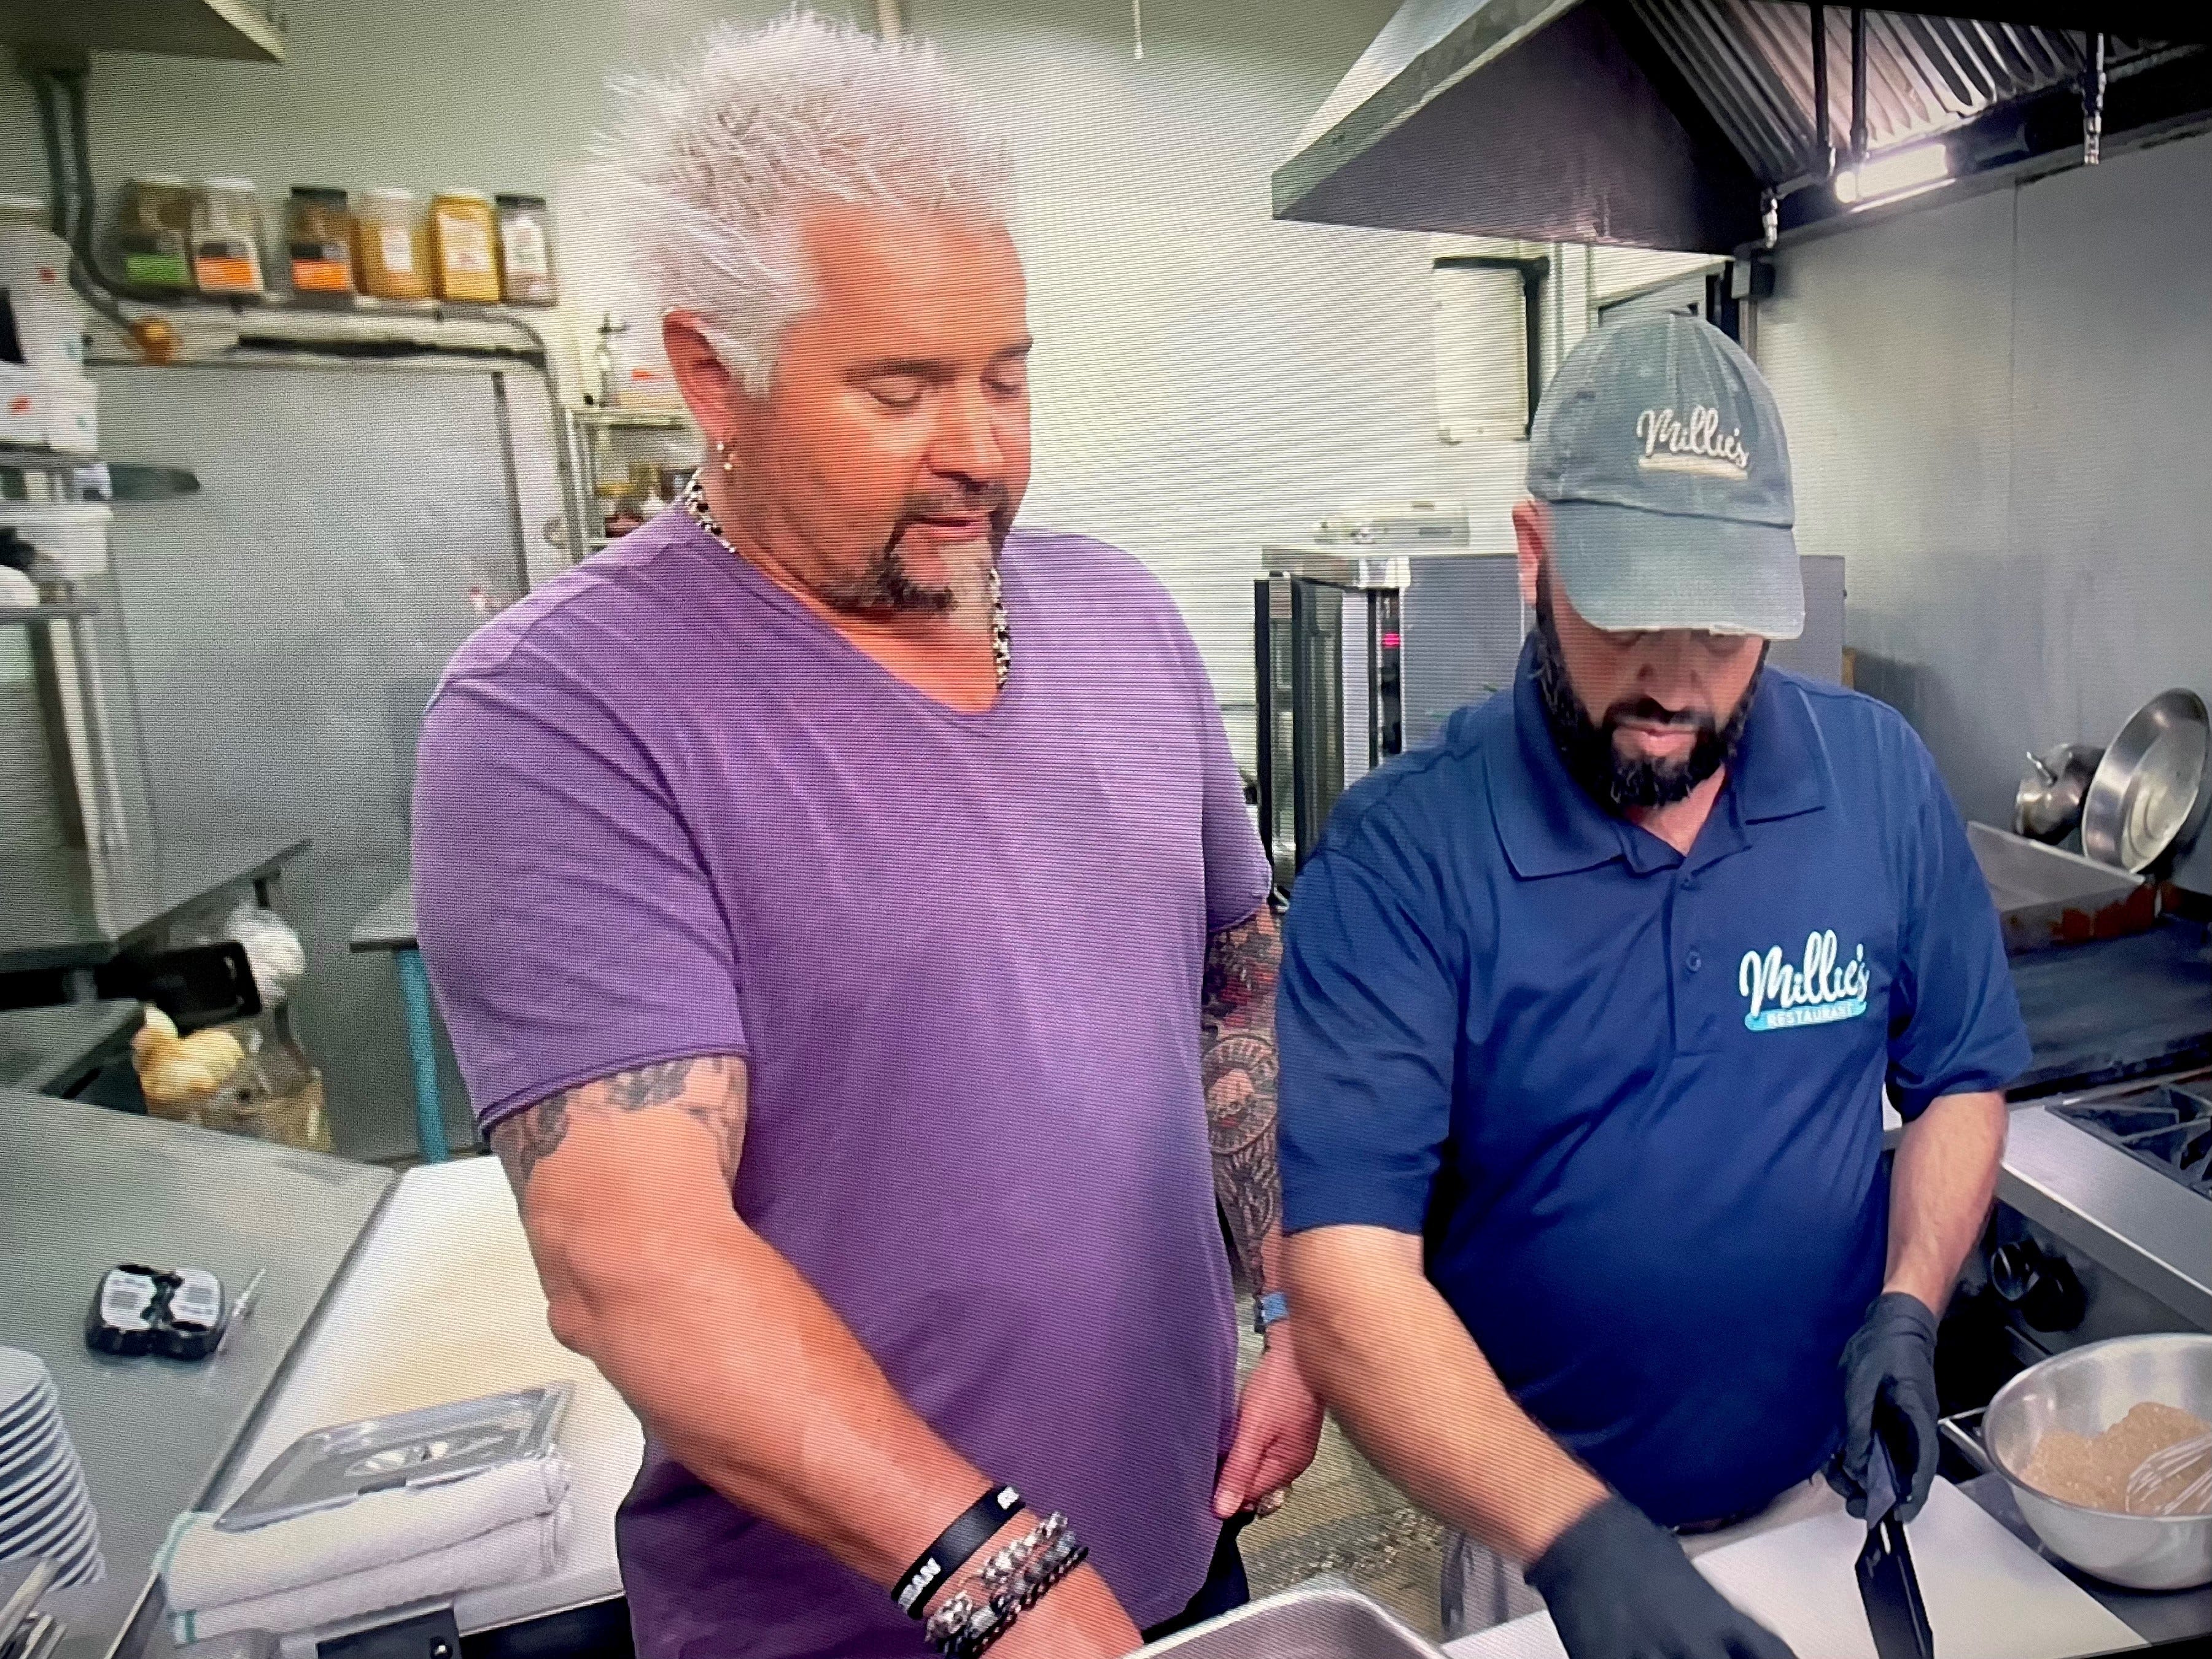 Check out the 6 Daytona Beach-area restaurants approved by celebrity chef Guy Fieri